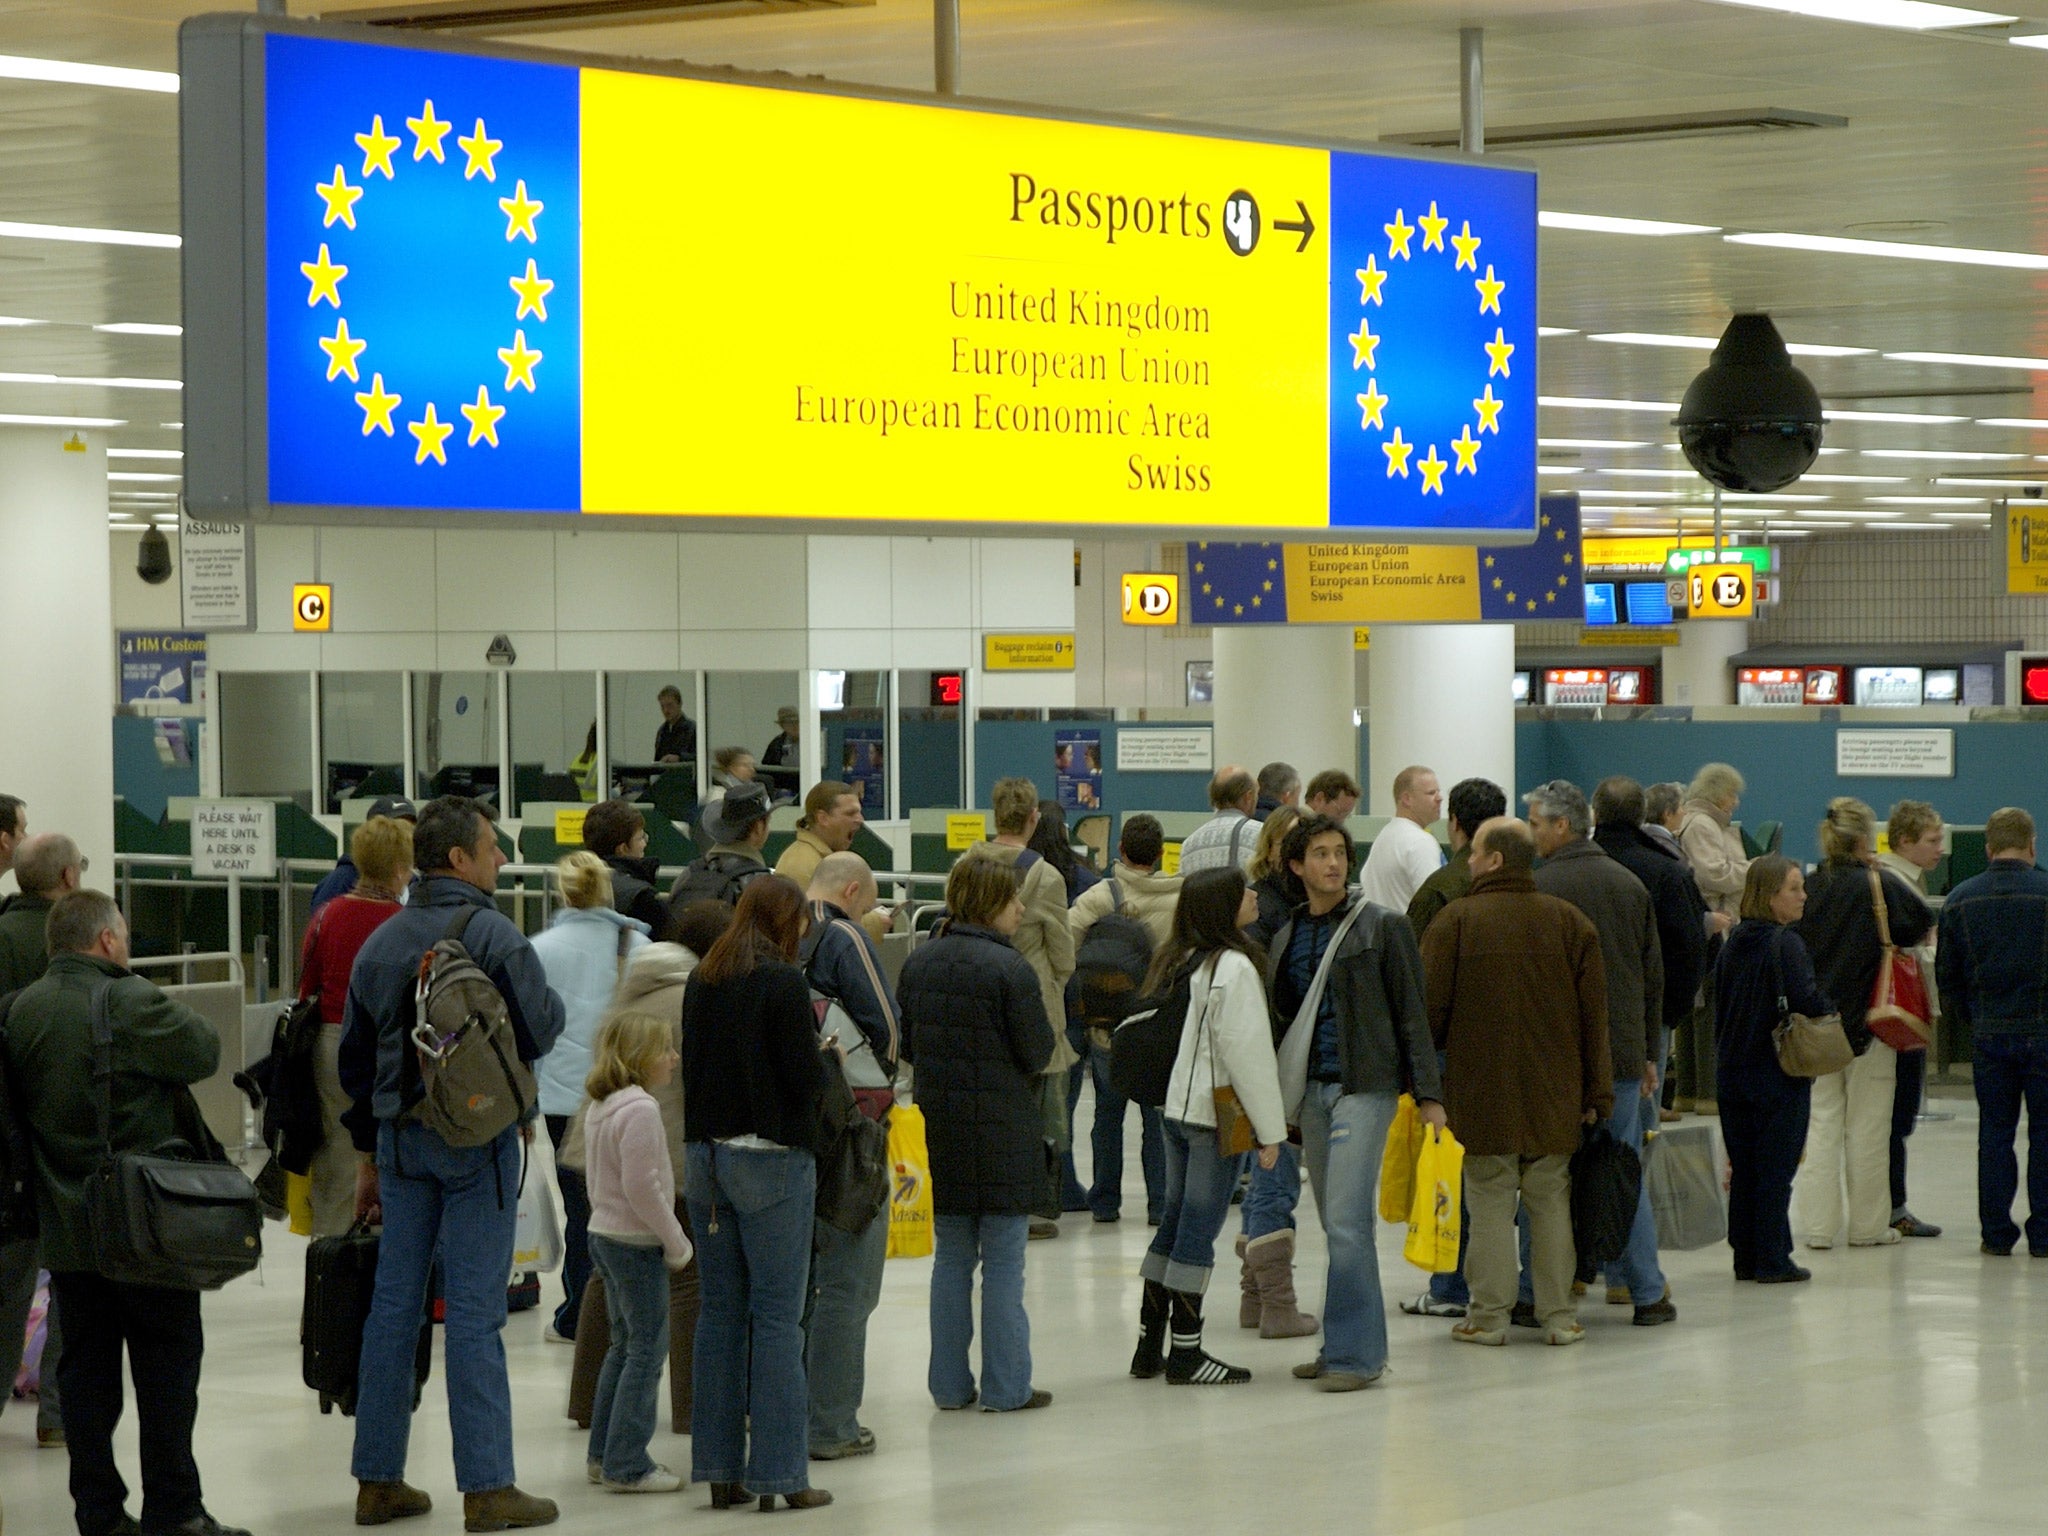 UK immigration queue for members of the EU